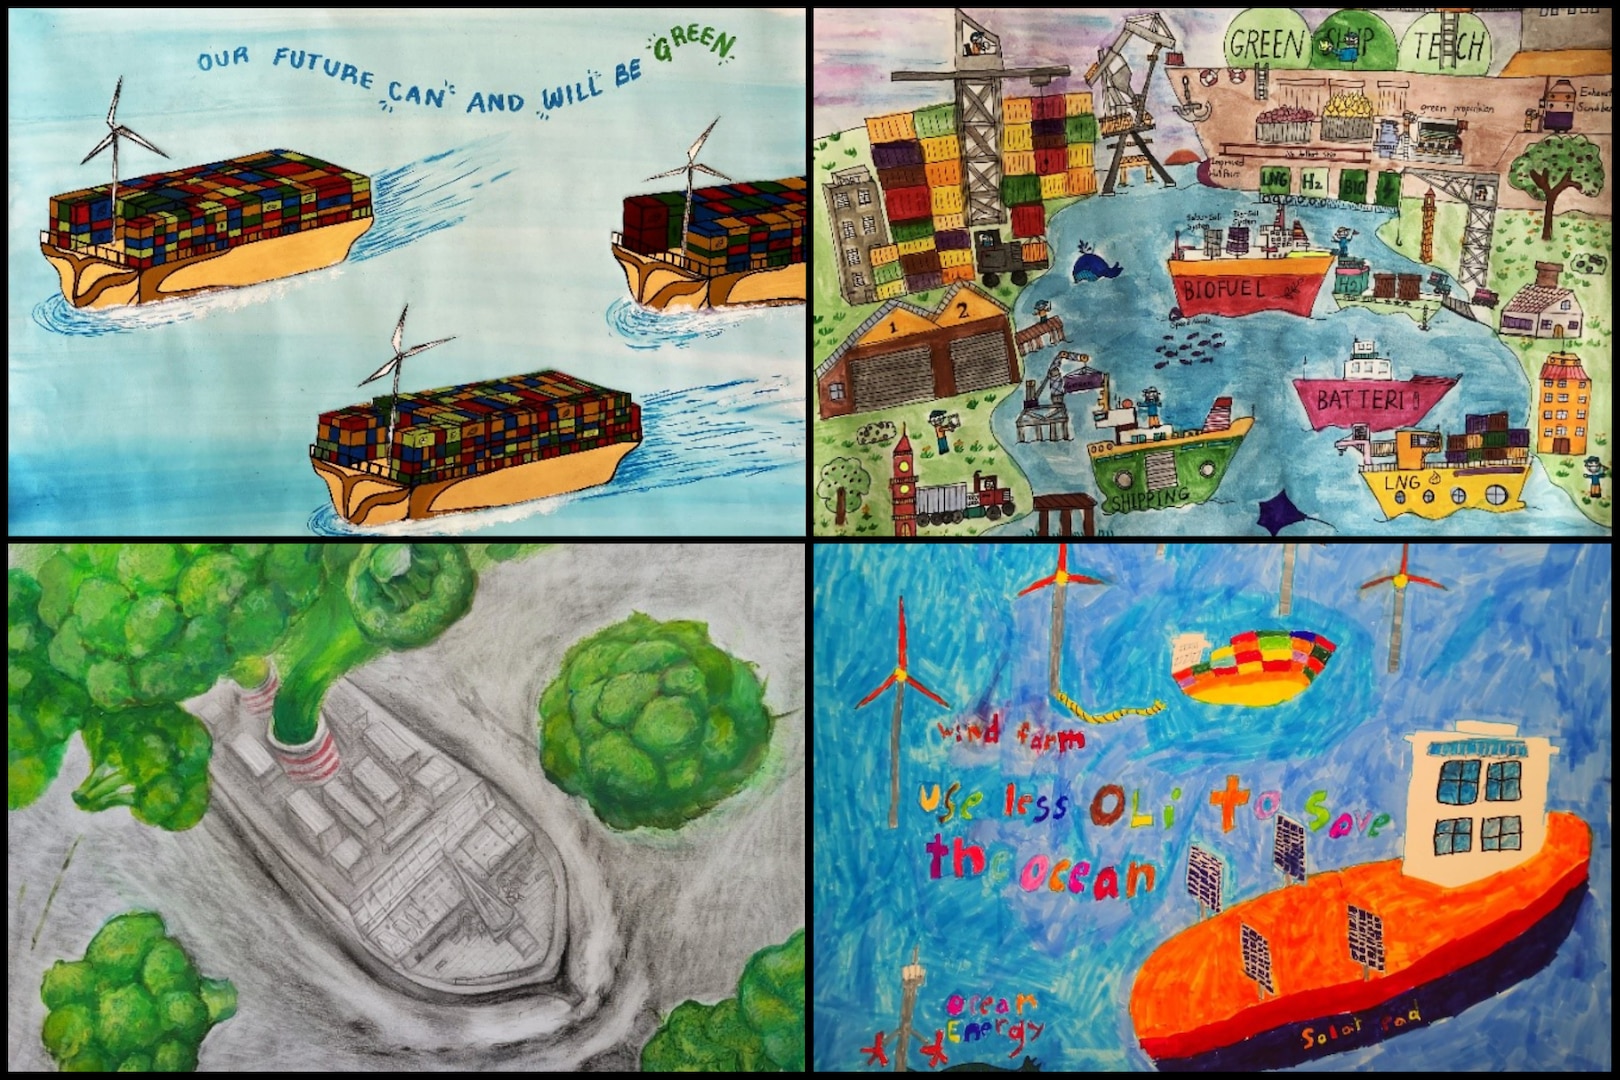 Young artists illustrate greener shipping